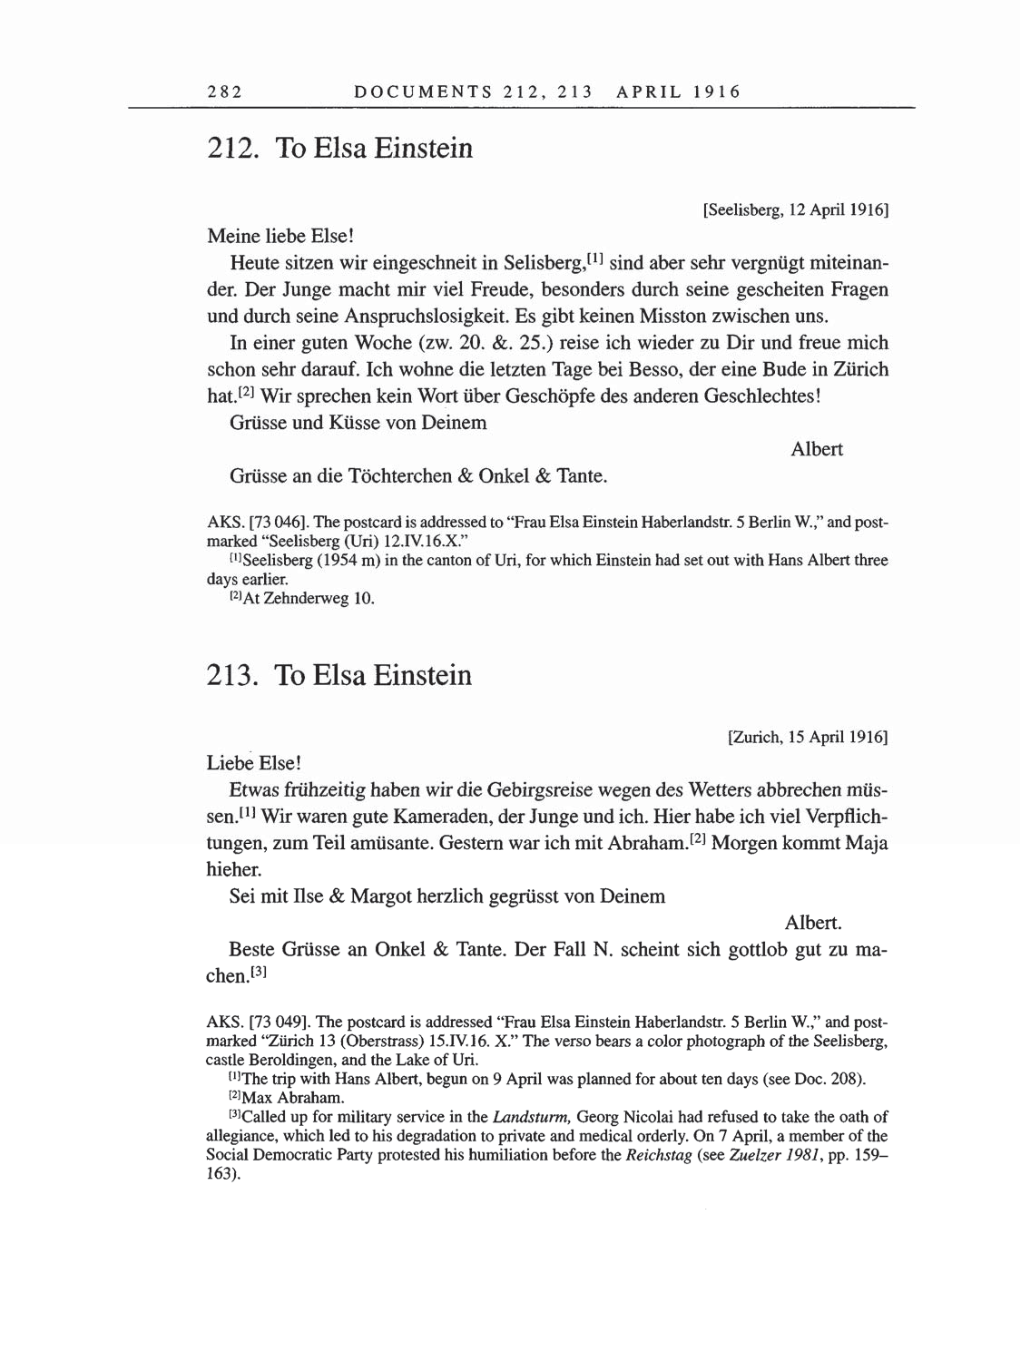 Volume 8, Part A: The Berlin Years: Correspondence 1914-1917 page 282